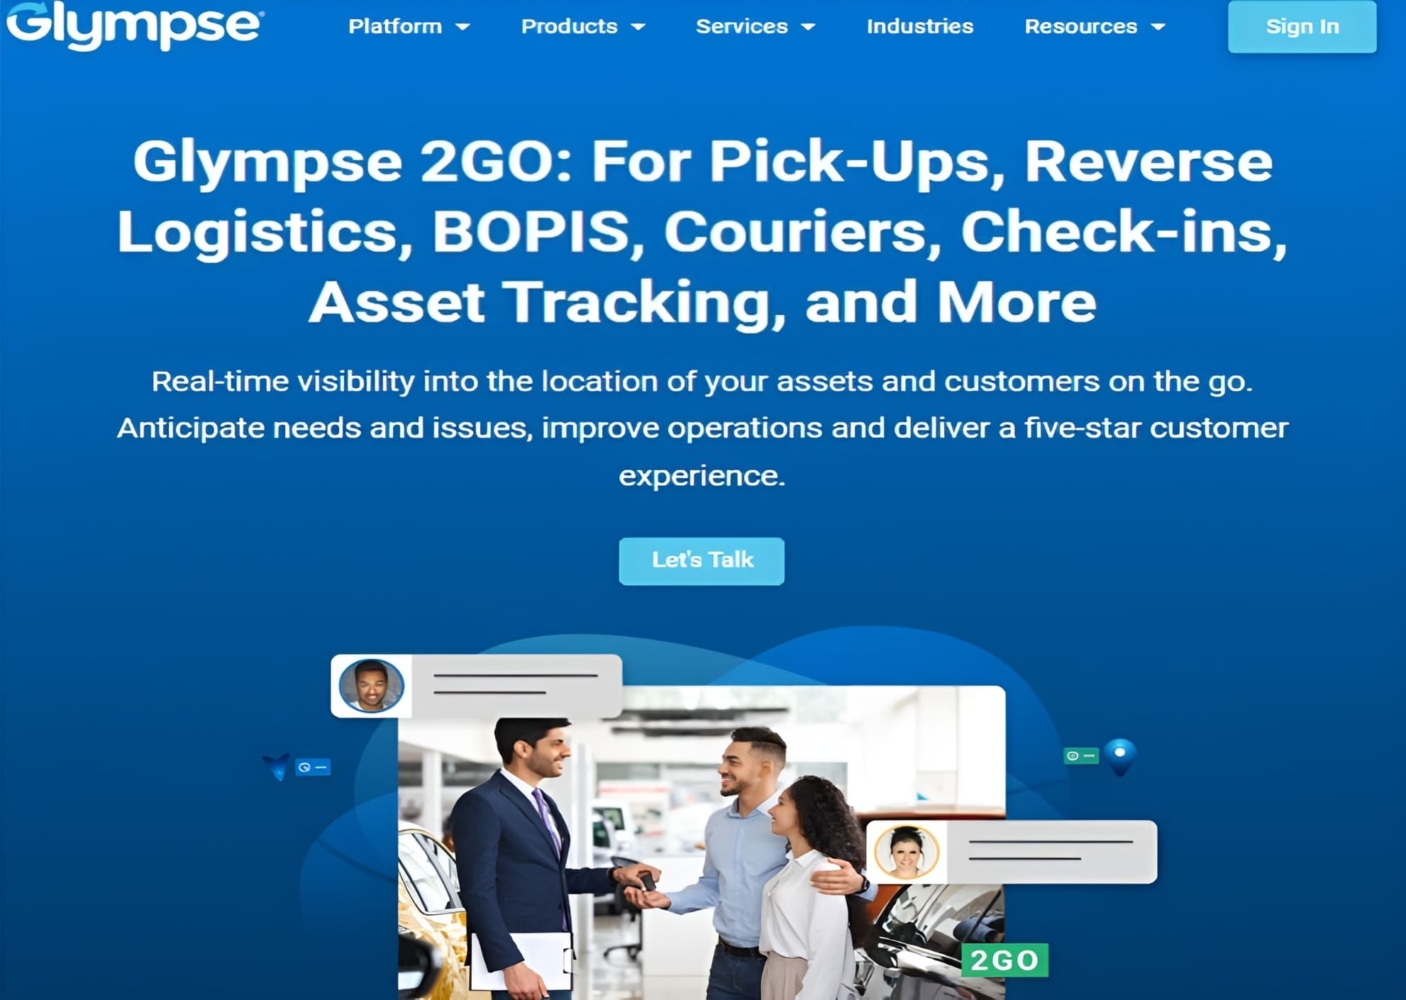 An image of Glympse2GO start page